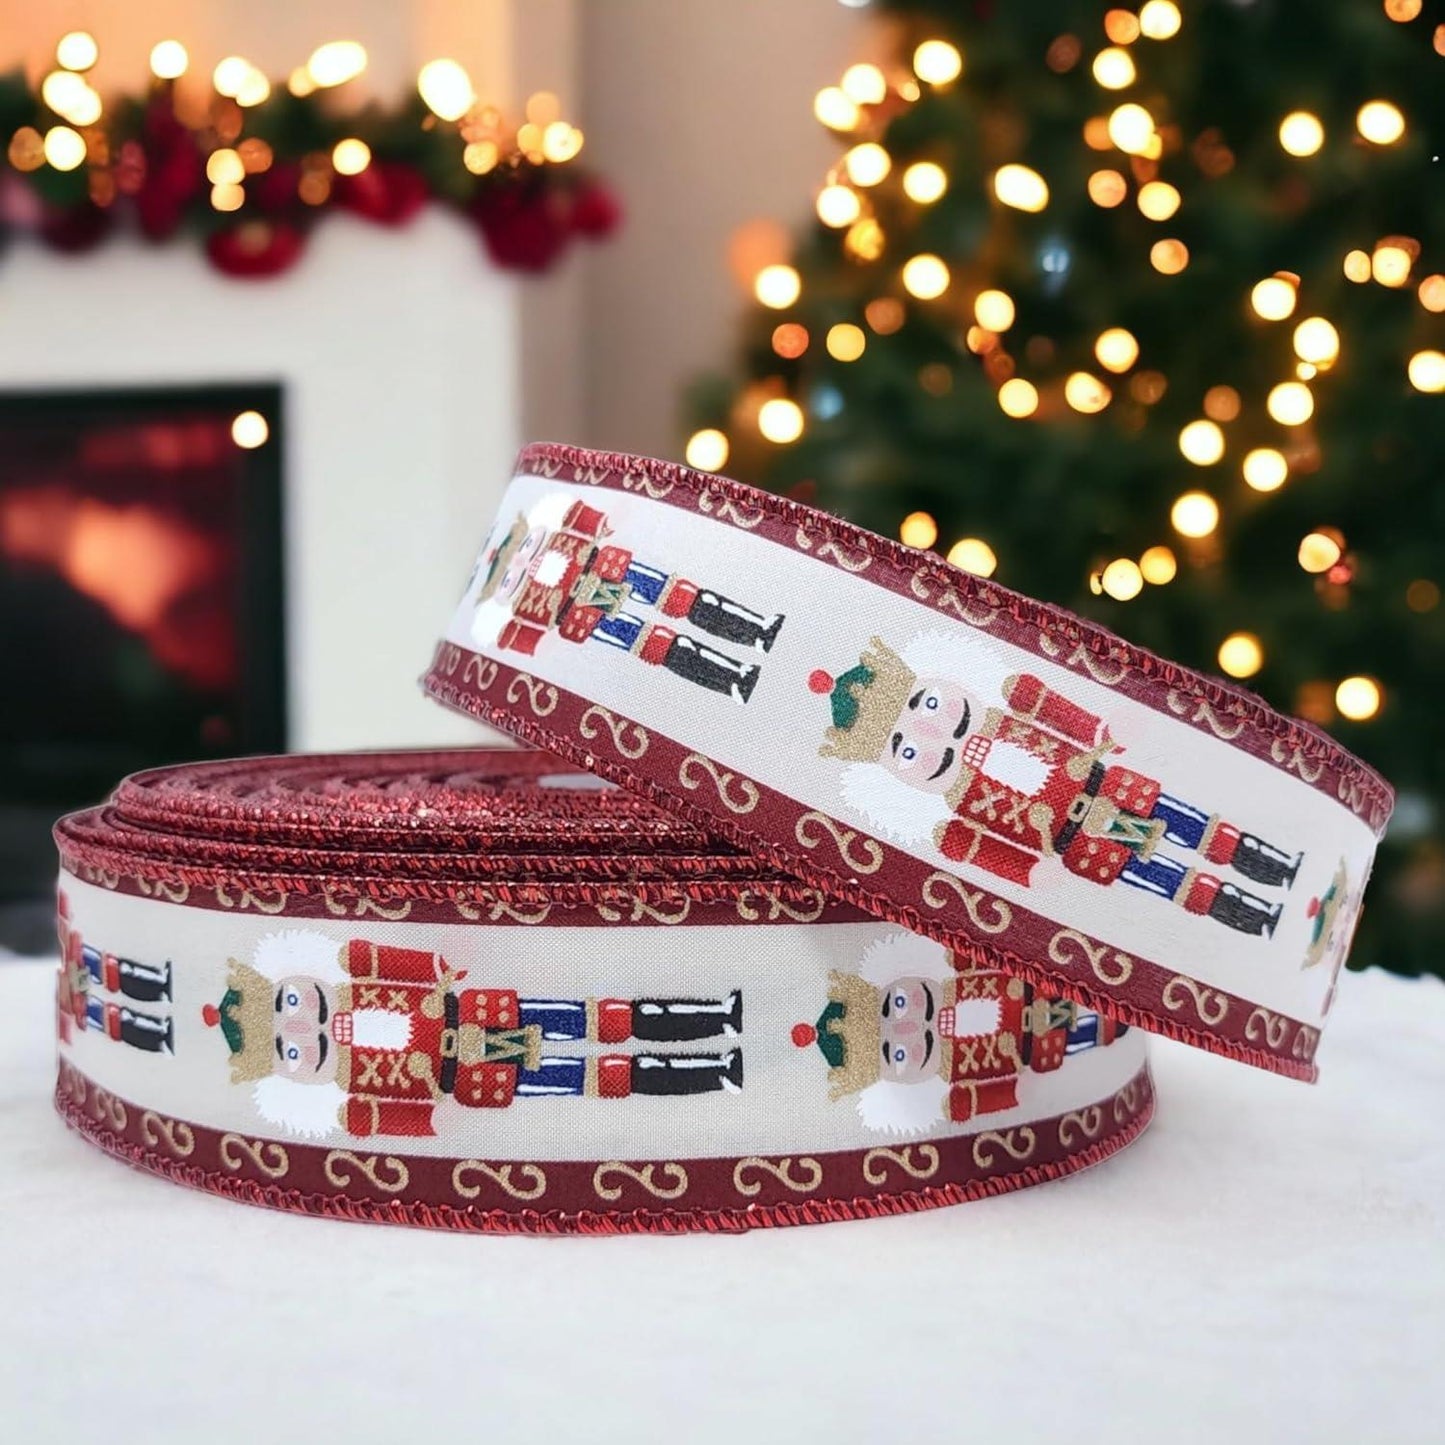 1.5" x 50 Yards Wired, Ivory, Gold, Red, Green, and Blue, Nutcracker Ribbon with Metallic Highlights & Tinsel Trim for Christmas, Holiday, Trees, Wreaths, Garlands, Gifts, Bows, Crafts Mega Large Roll